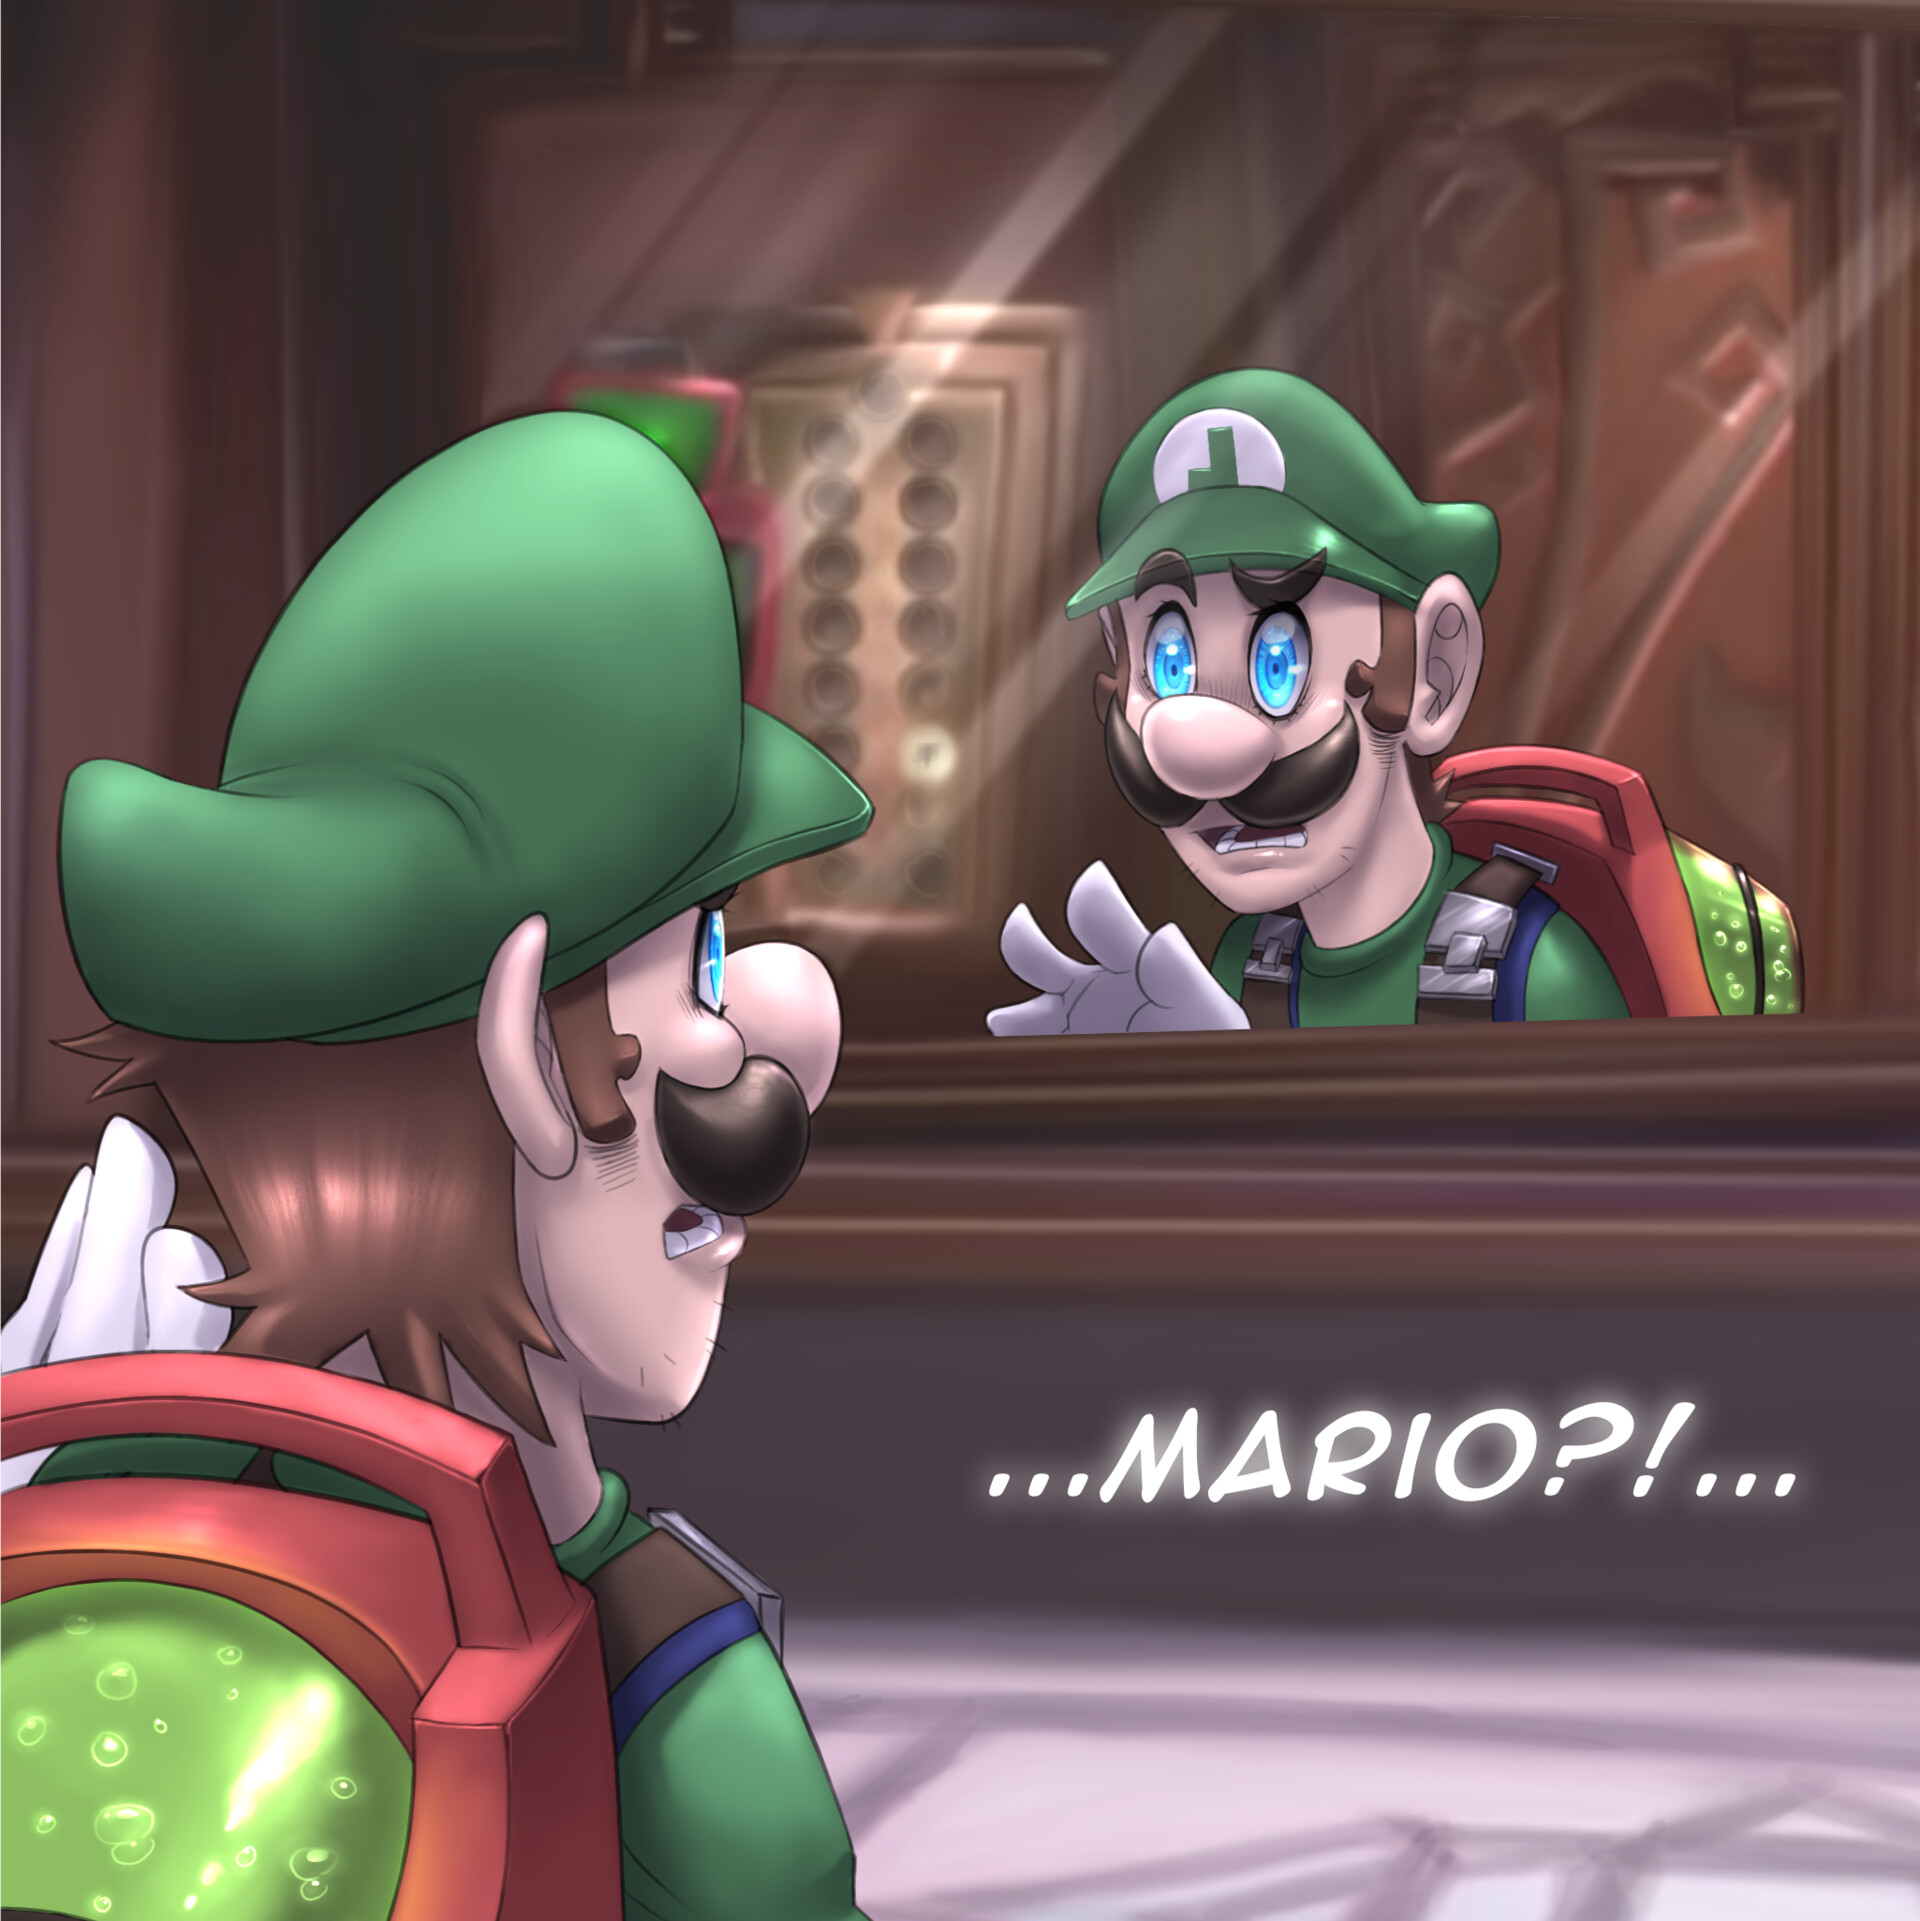 In Luigi's Mansion 3, in the elevator in front of the mirror